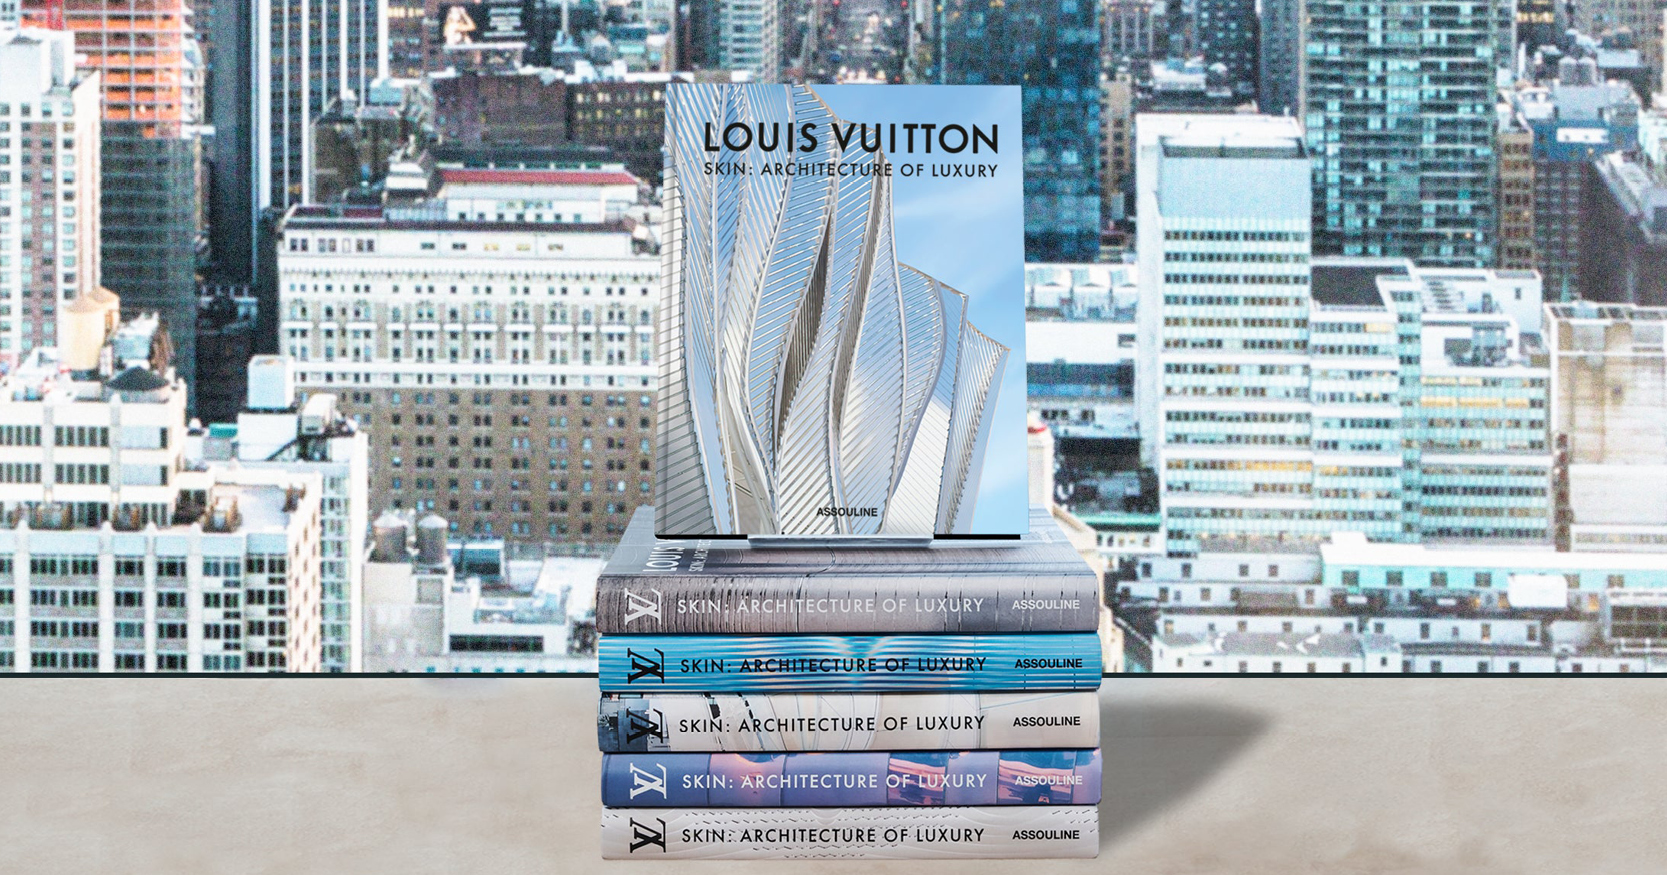 Louis Vuitton Skin (New York Cover): Architecture of Luxury